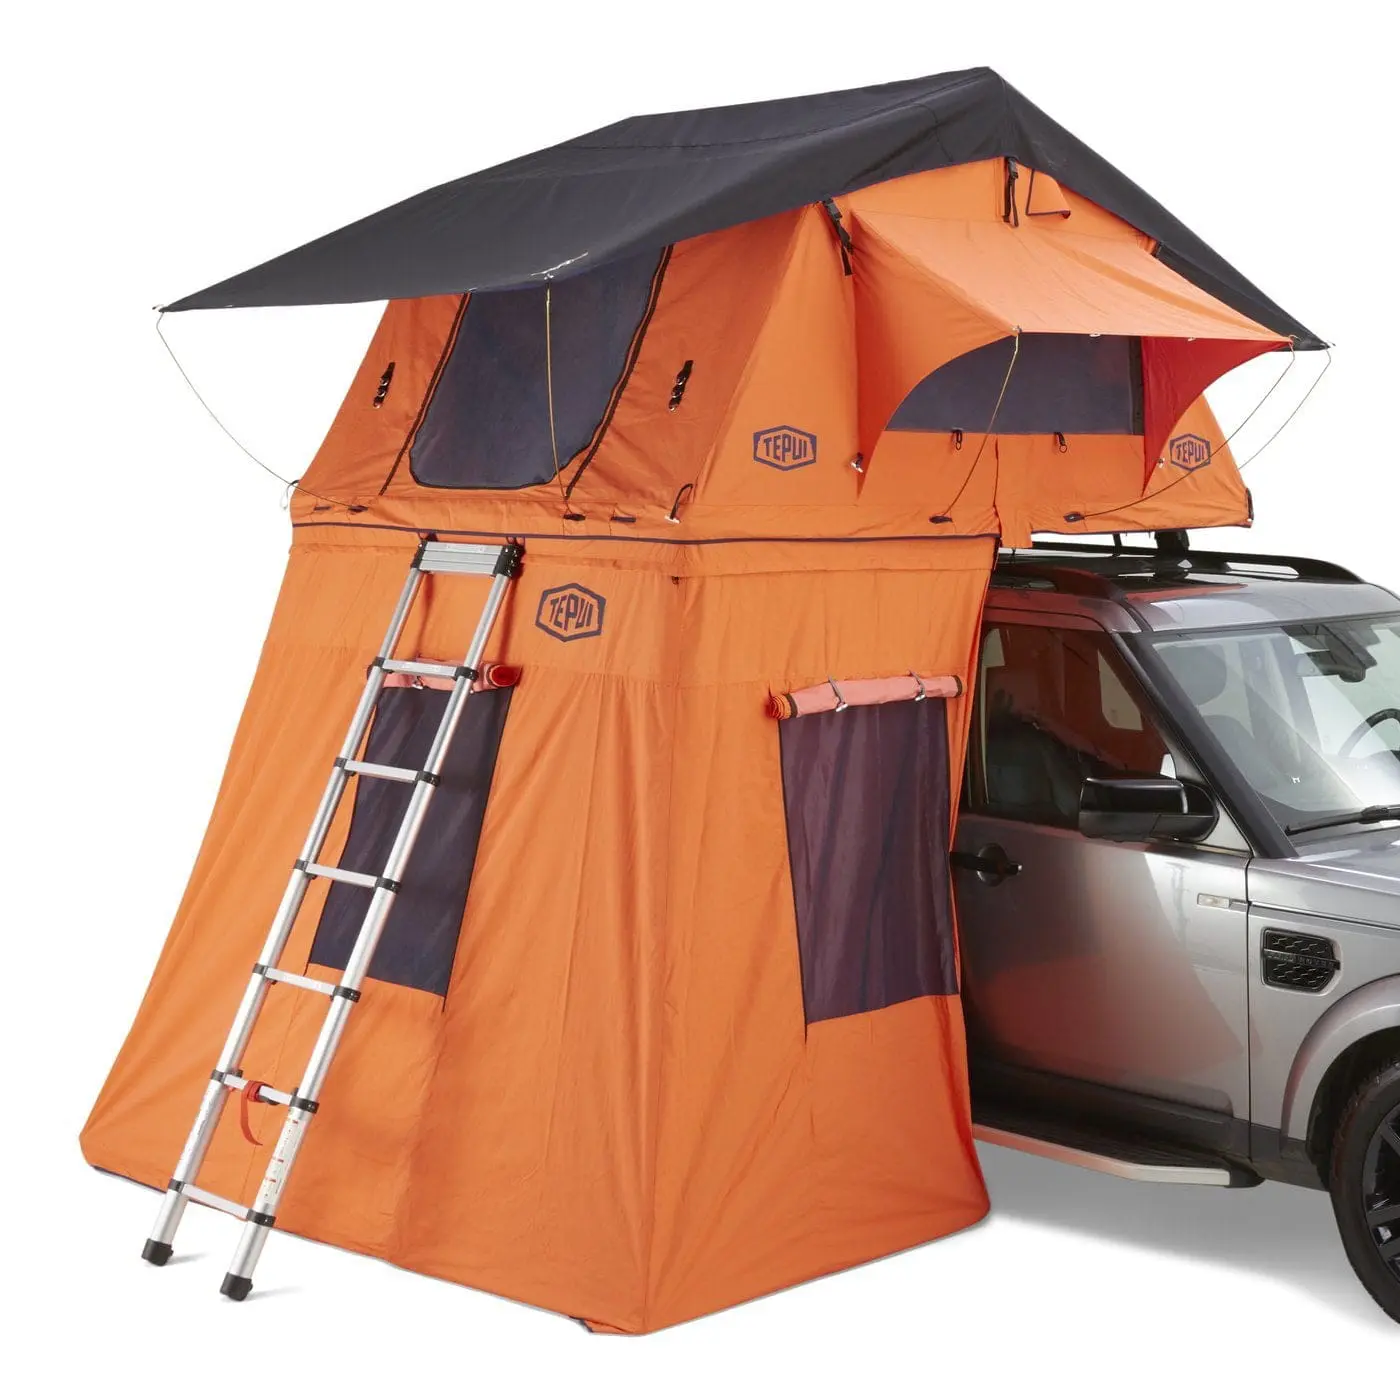 rooftop tent annex mounted on vehicle providing protected space under tent.